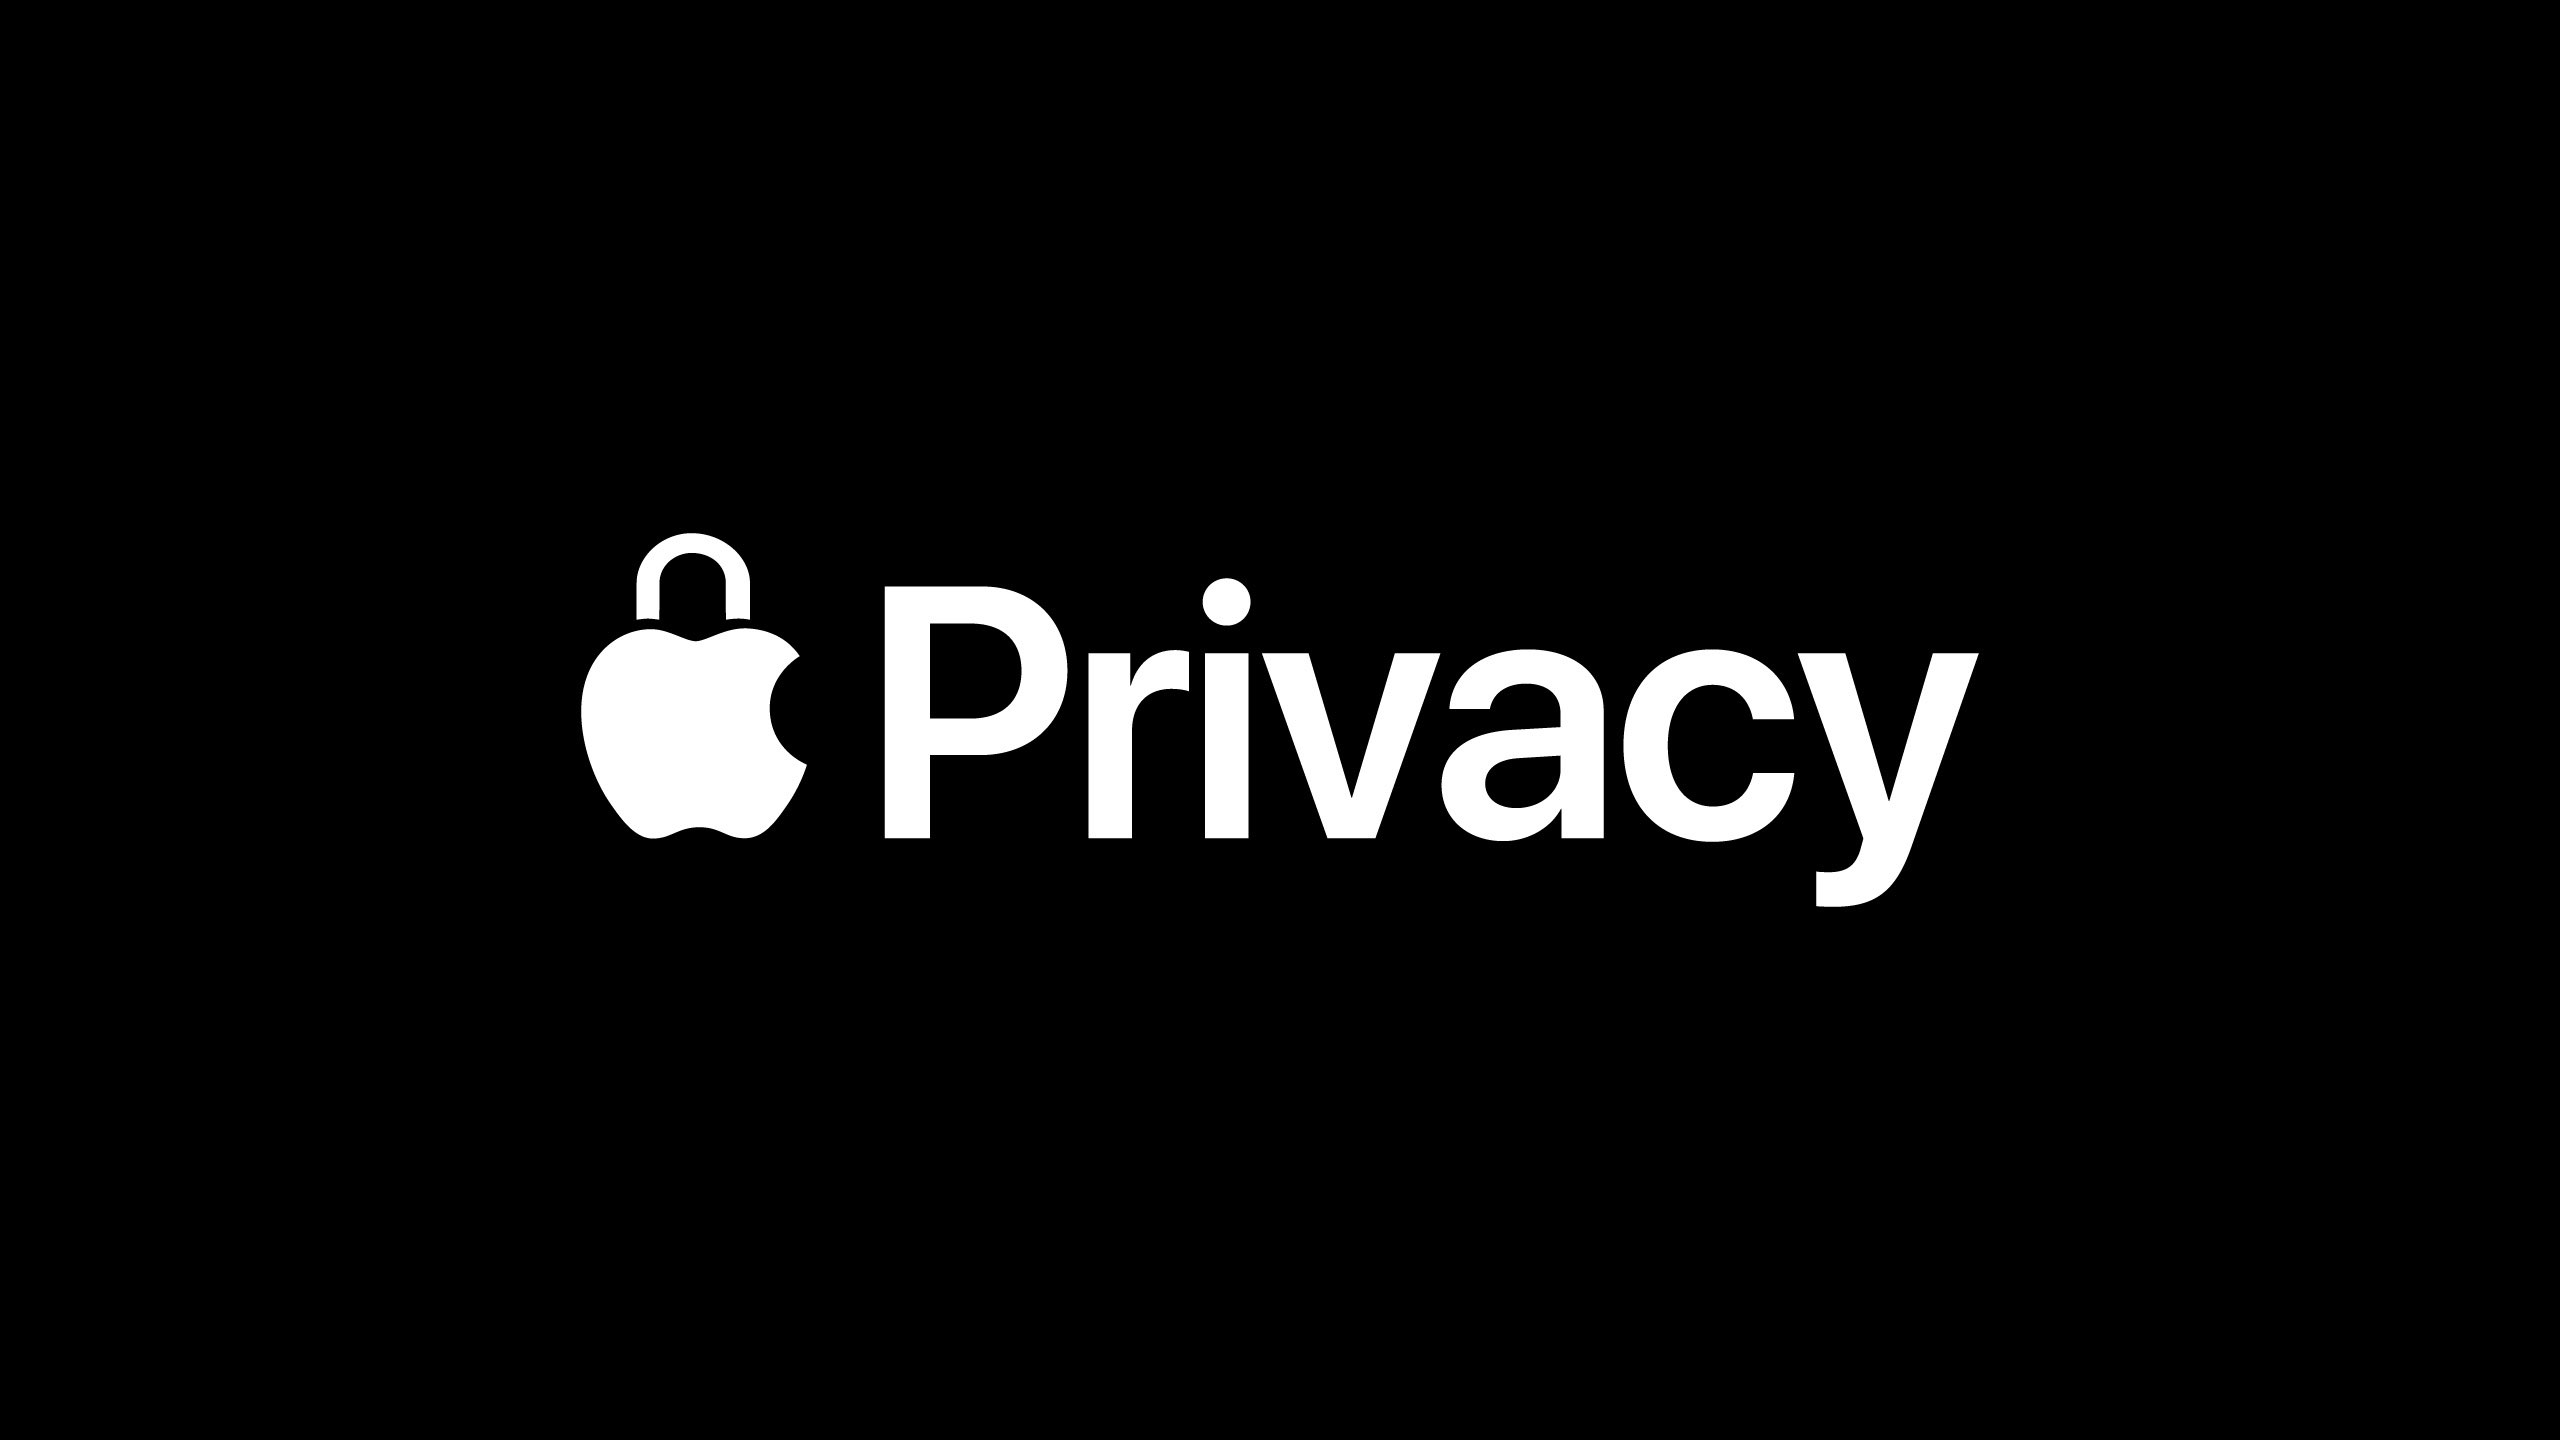 A an image with the Apple logo and the word "privacy" set against a black background